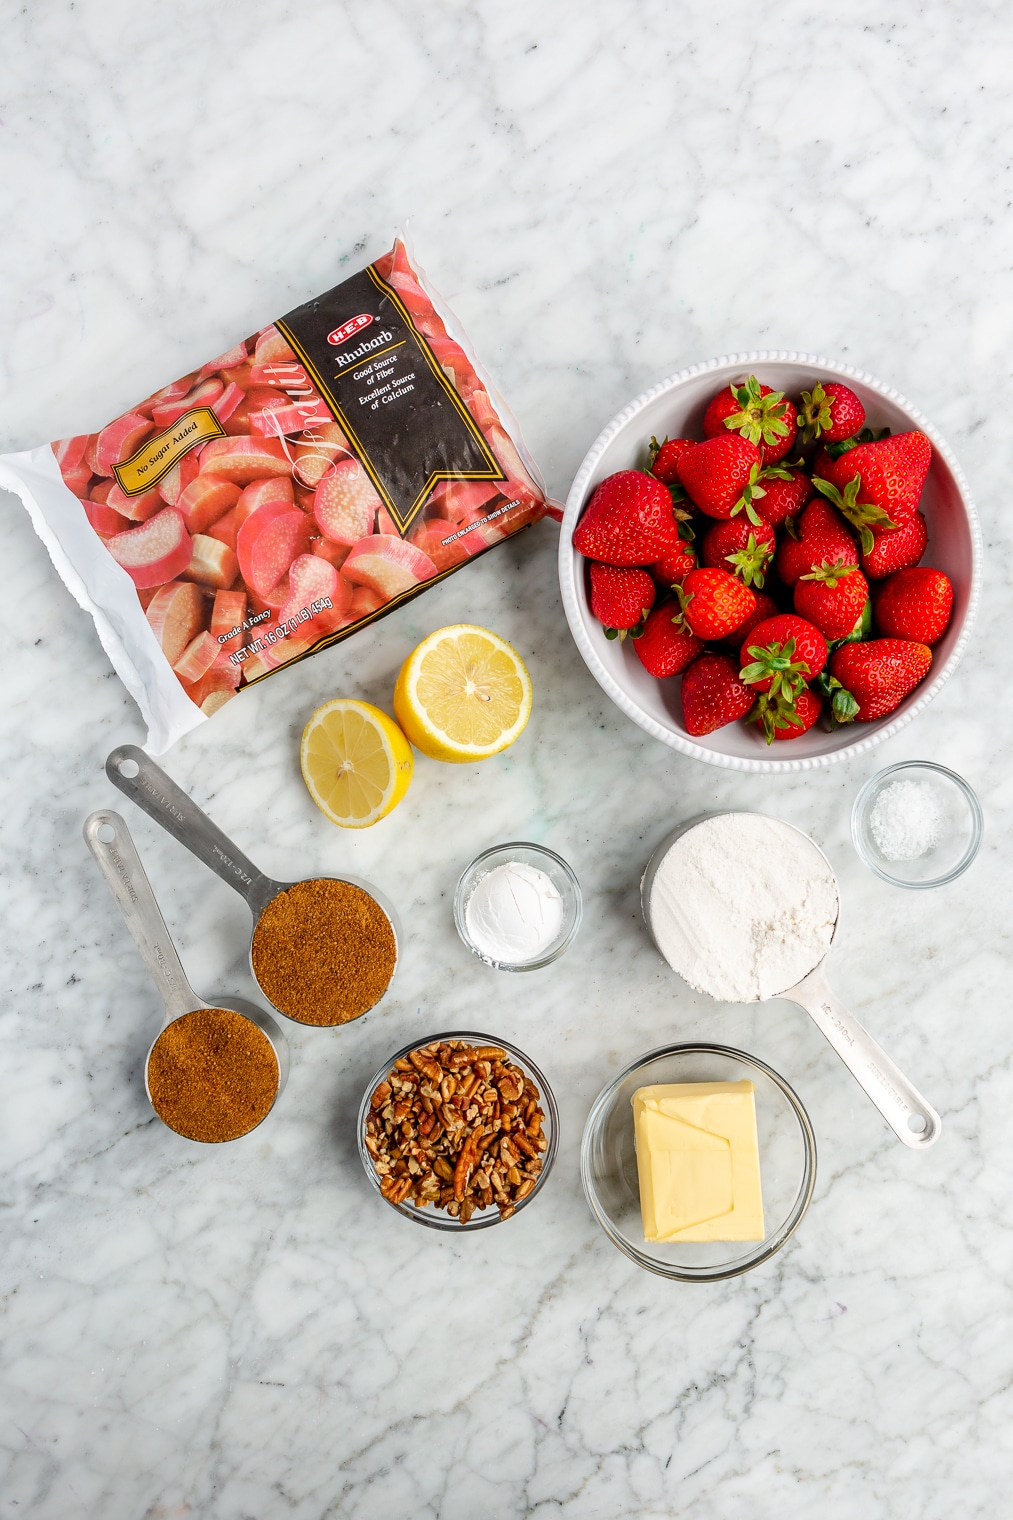 All of the ingredients for a strawberry rhubarb crisp on a marble surface.